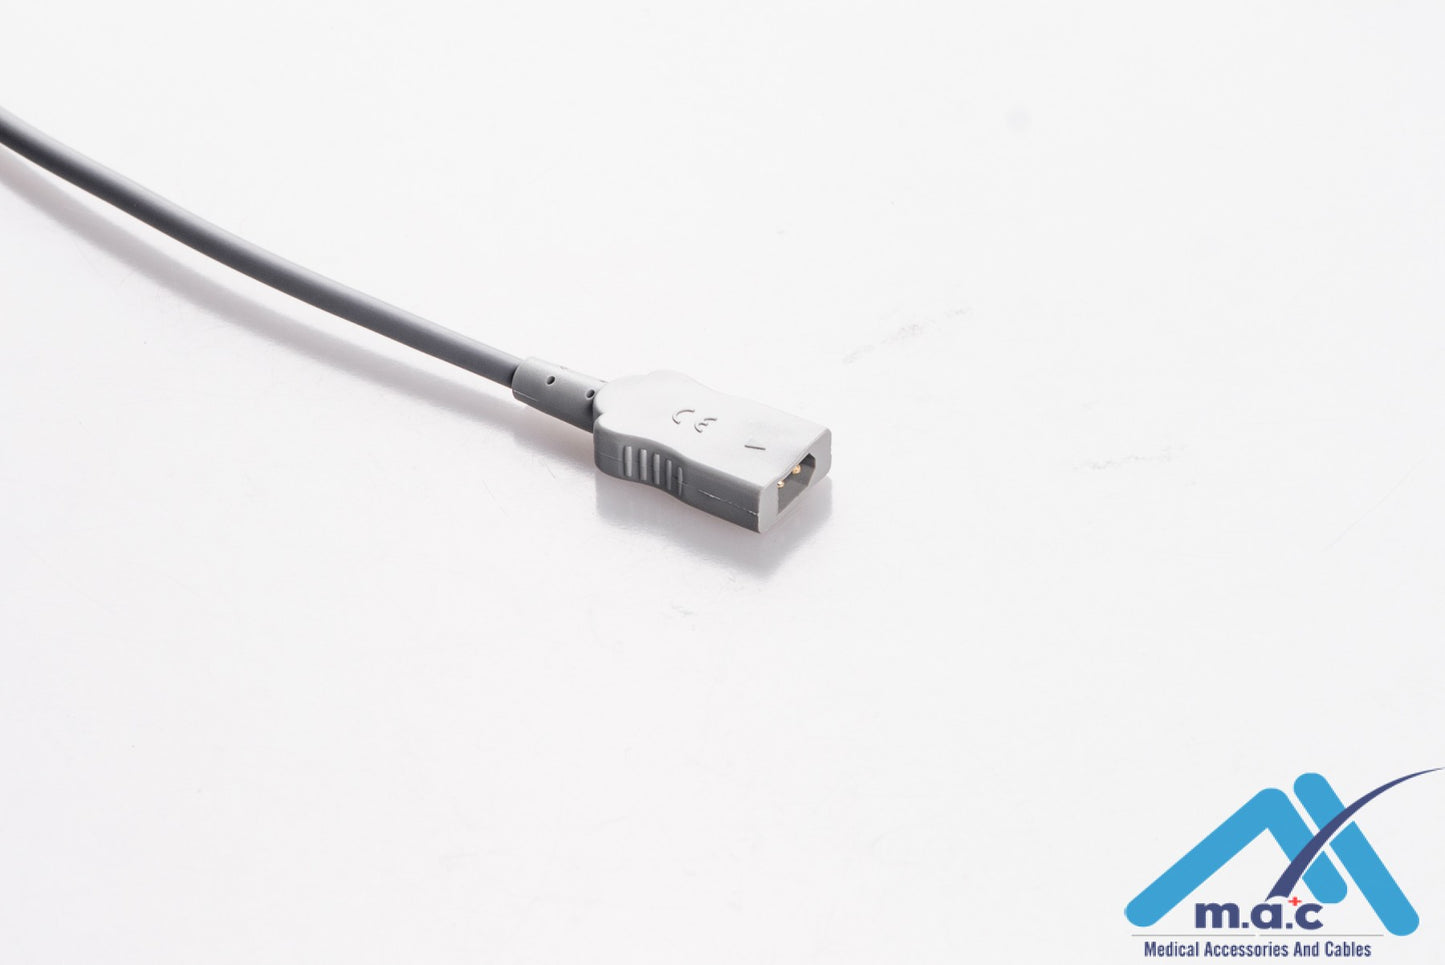 Mindray Compatibility Temperature Adapter Cable TMMR-30-AD